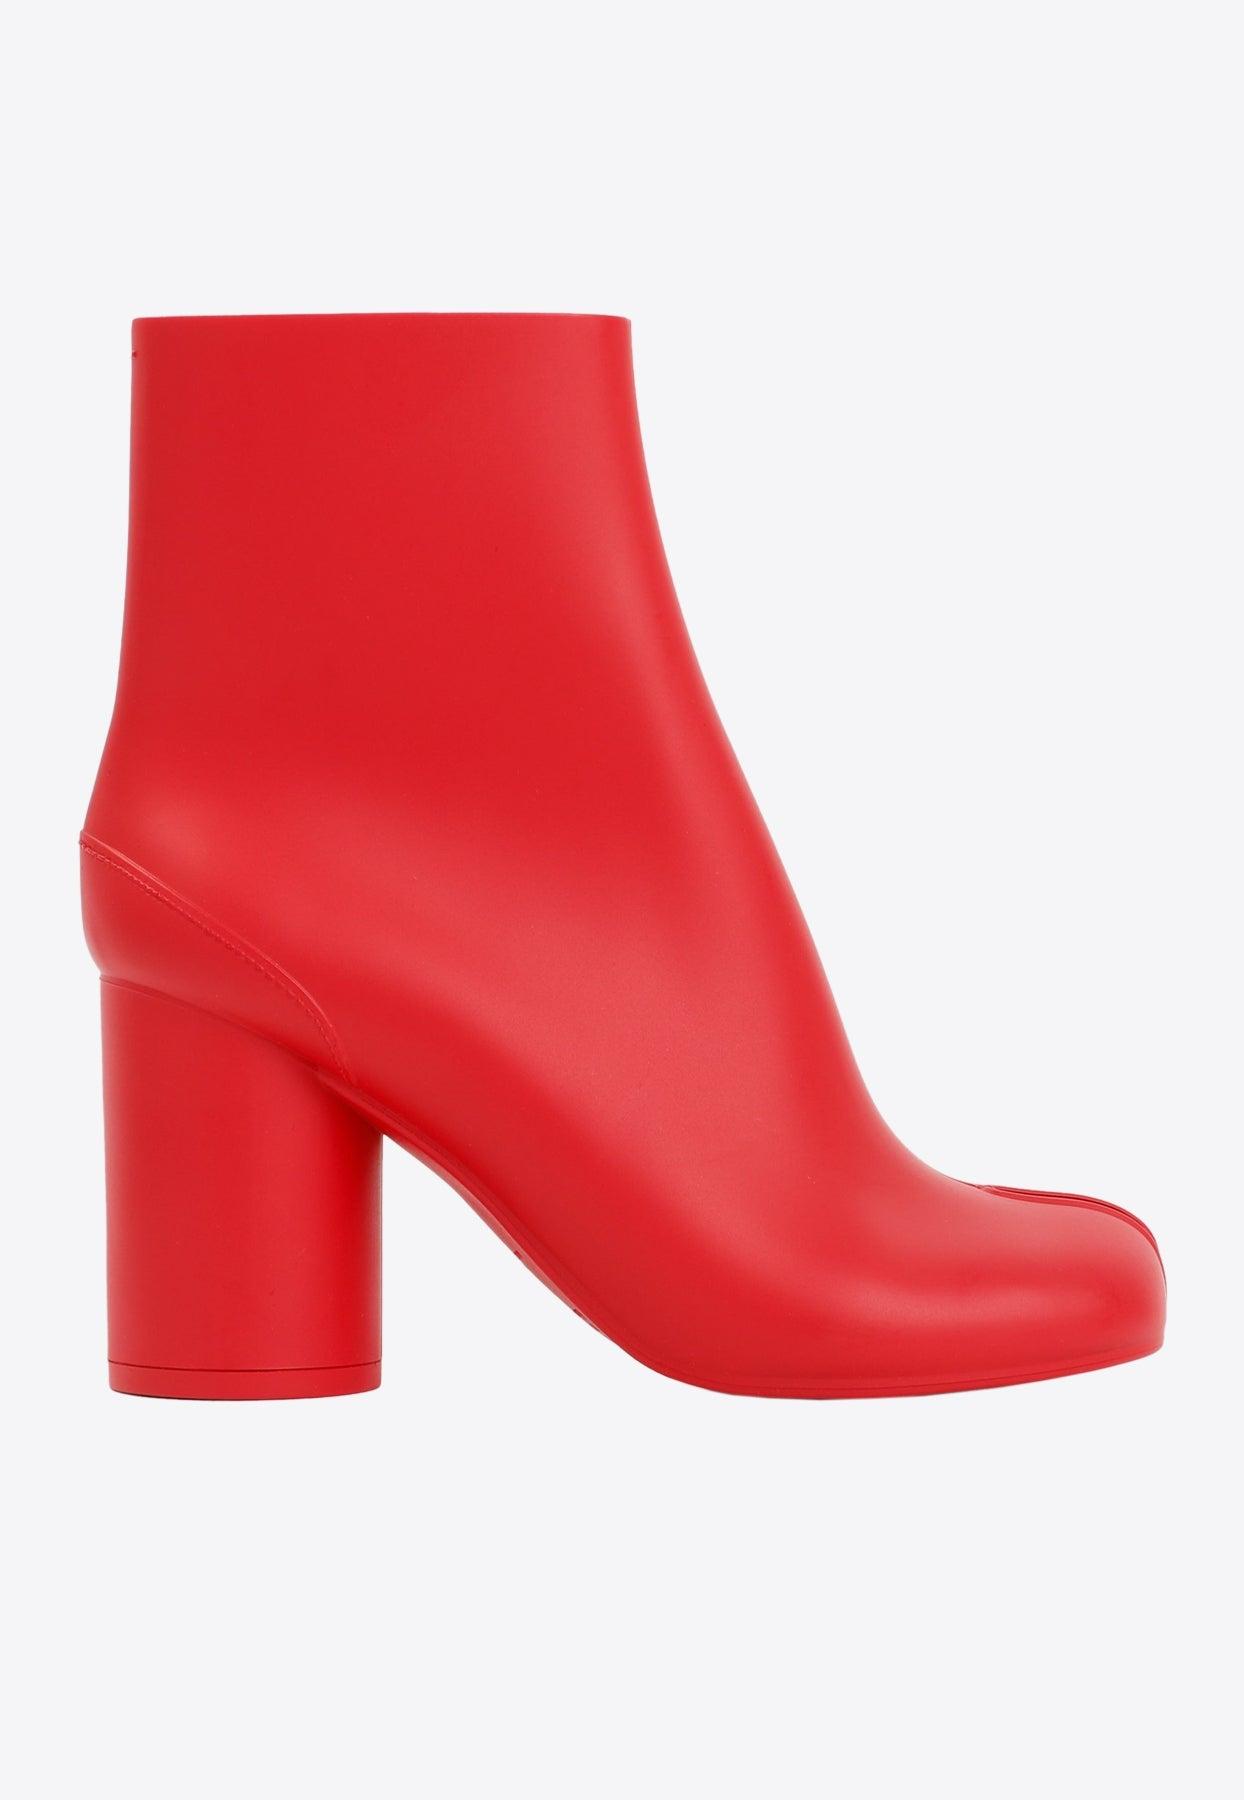 Maison Margiela 80 Tabi Rubber Ankle Boots in Red | Lyst